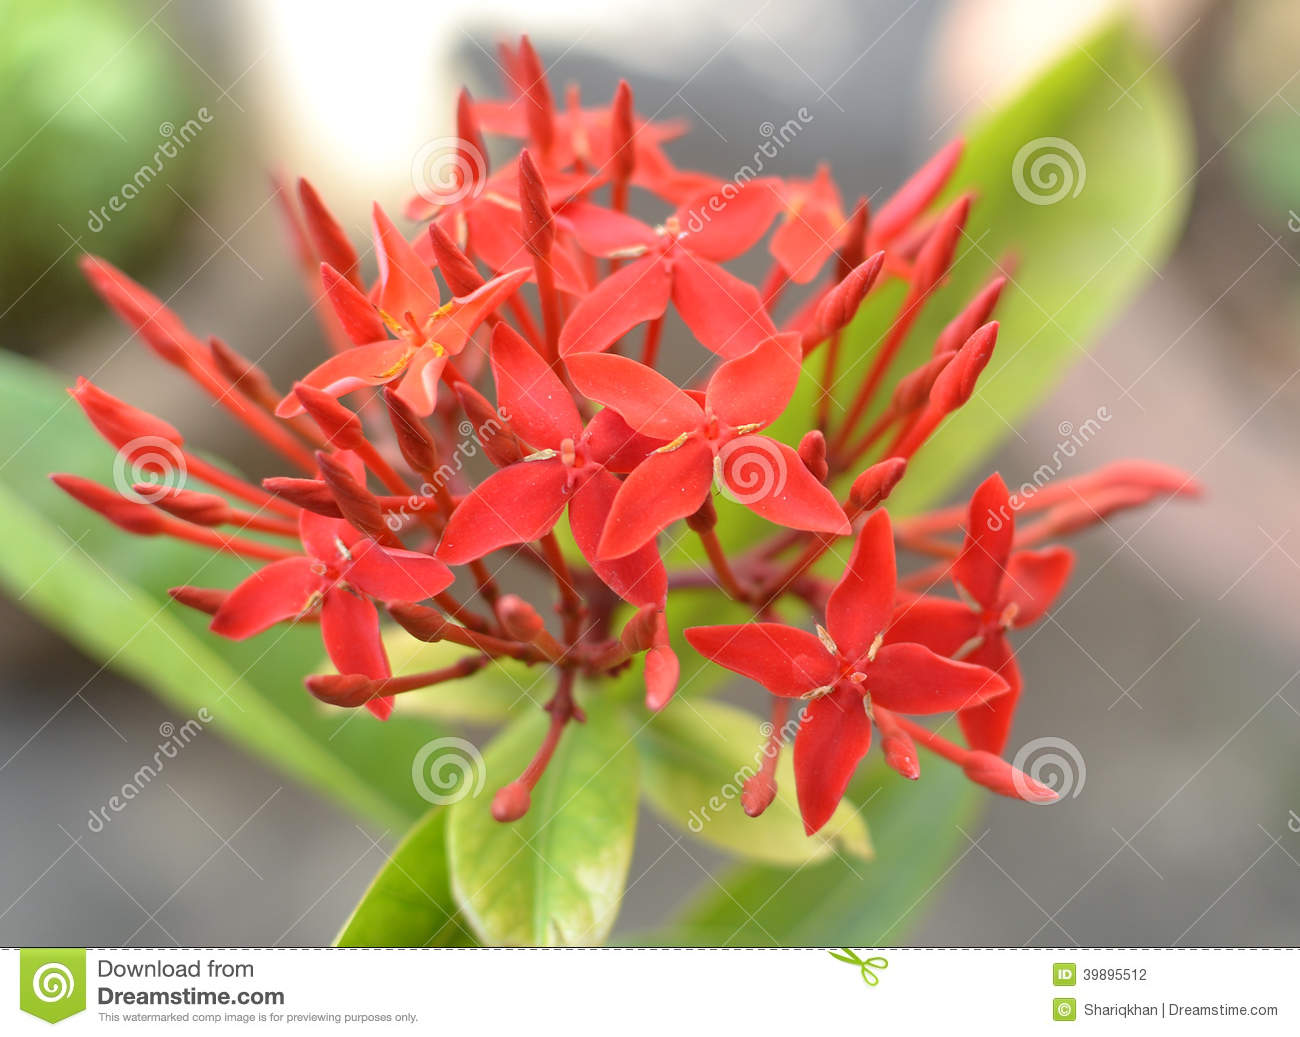 Ornamental Flowers Of Red Ioxa Coccinea Stock Photo   Image  39895512